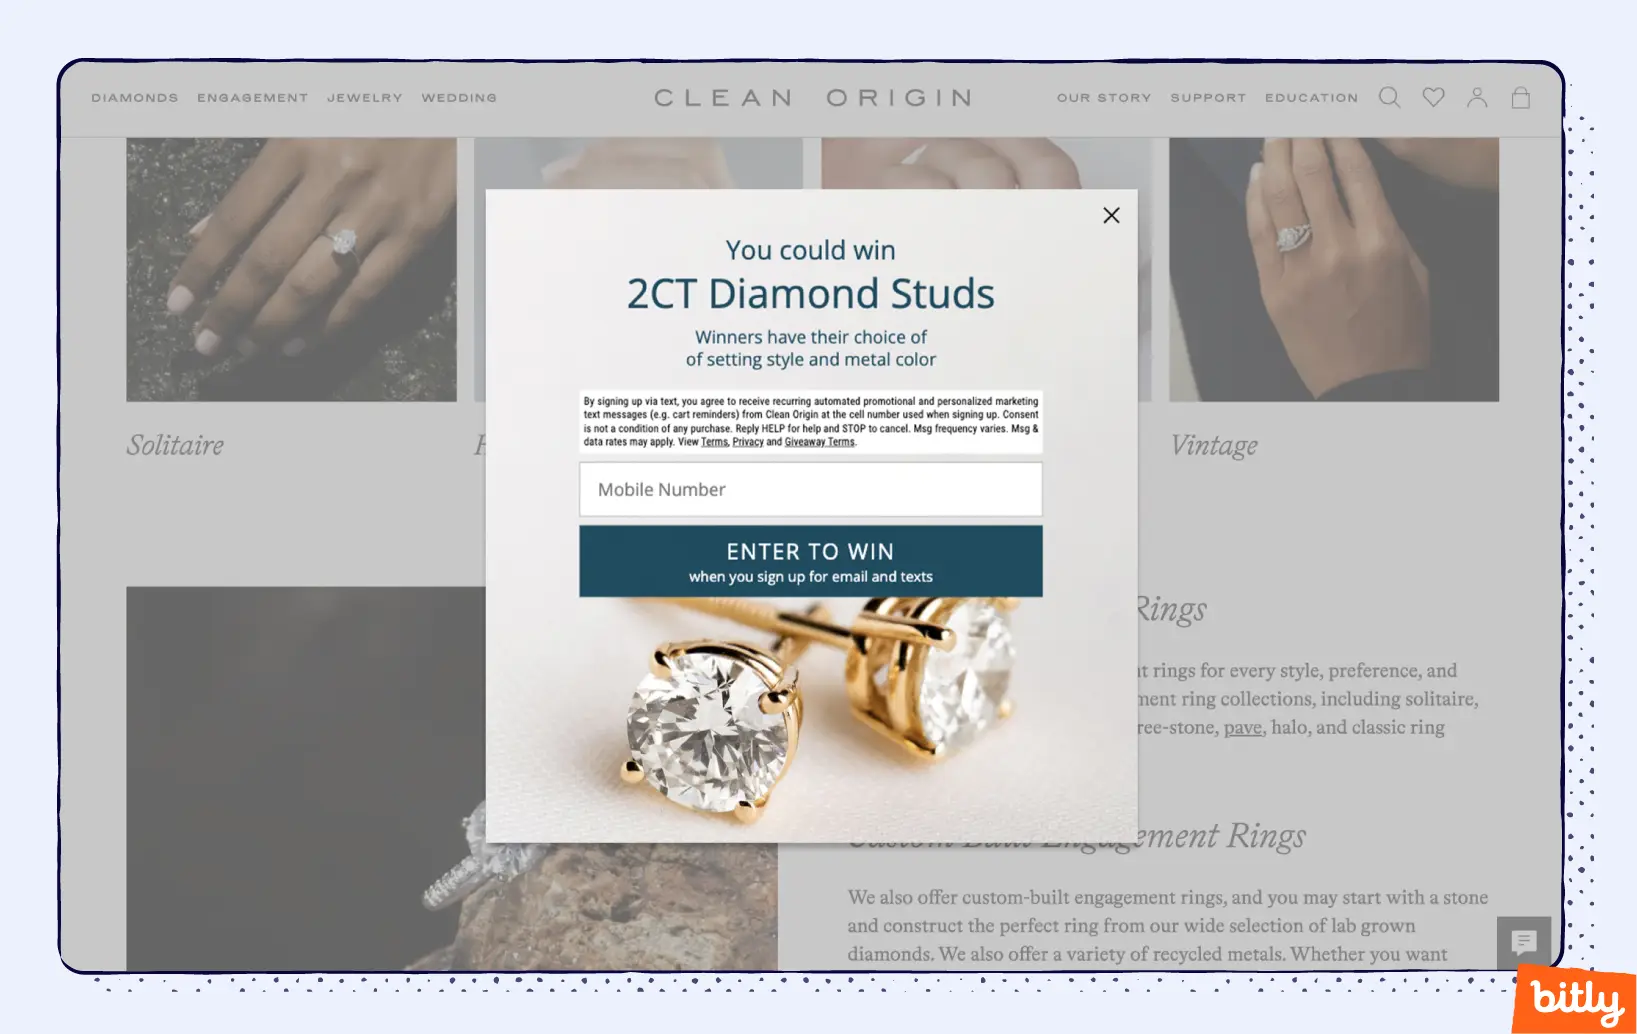 A popup window on the Clean Origin website allowing a user to enter their phone number for a chance to win diamond earrings.